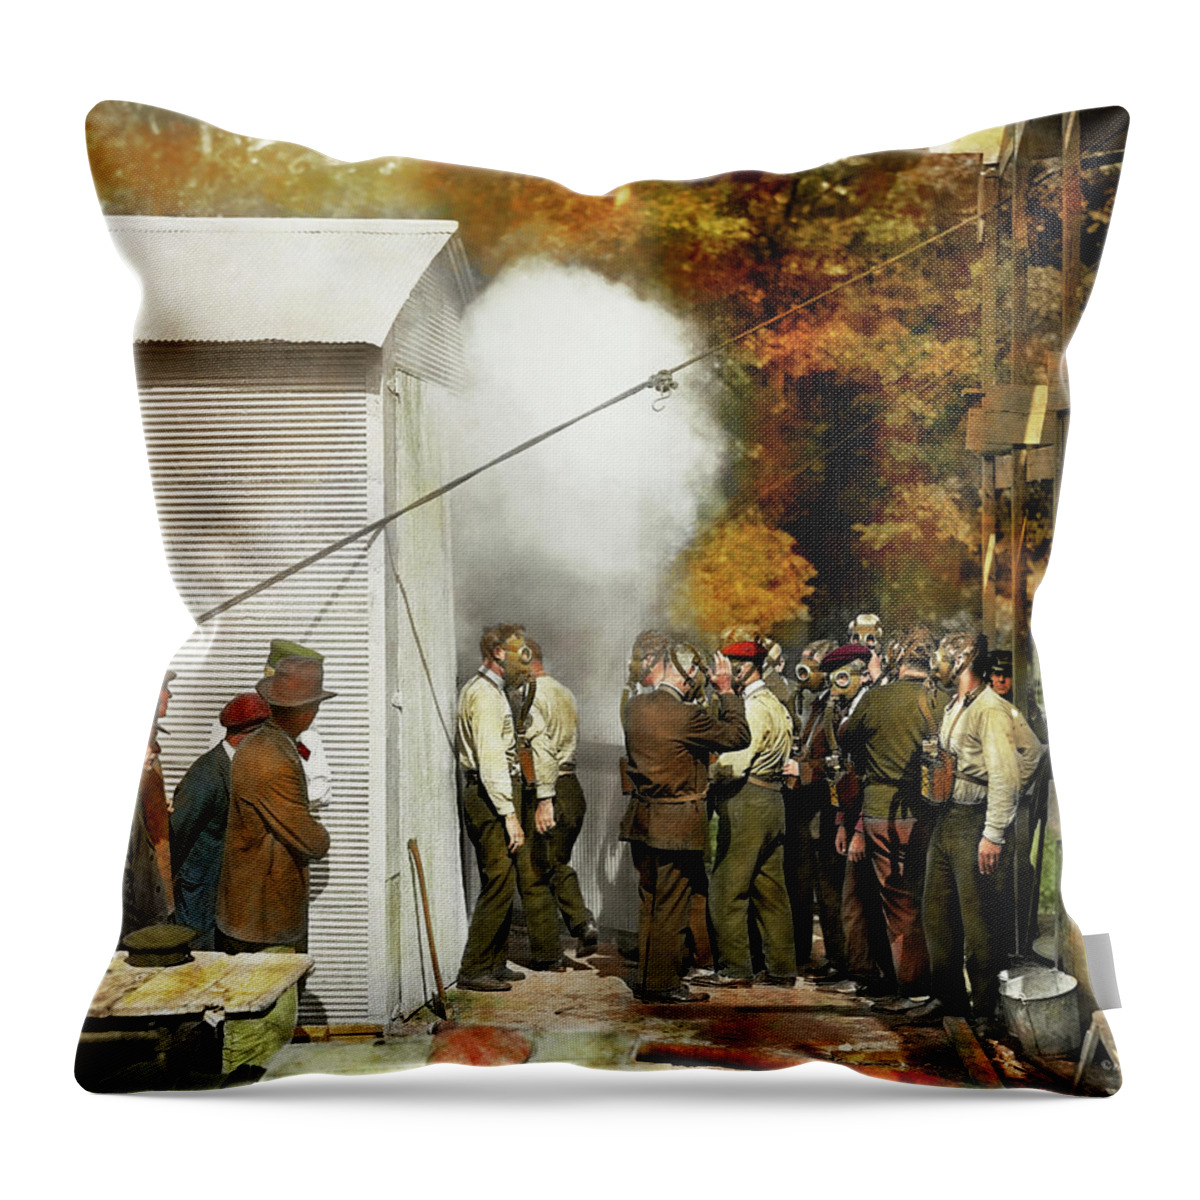 Steampunk Throw Pillow featuring the photograph Apocalypse - Apocalypse party 1923 by Mike Savad